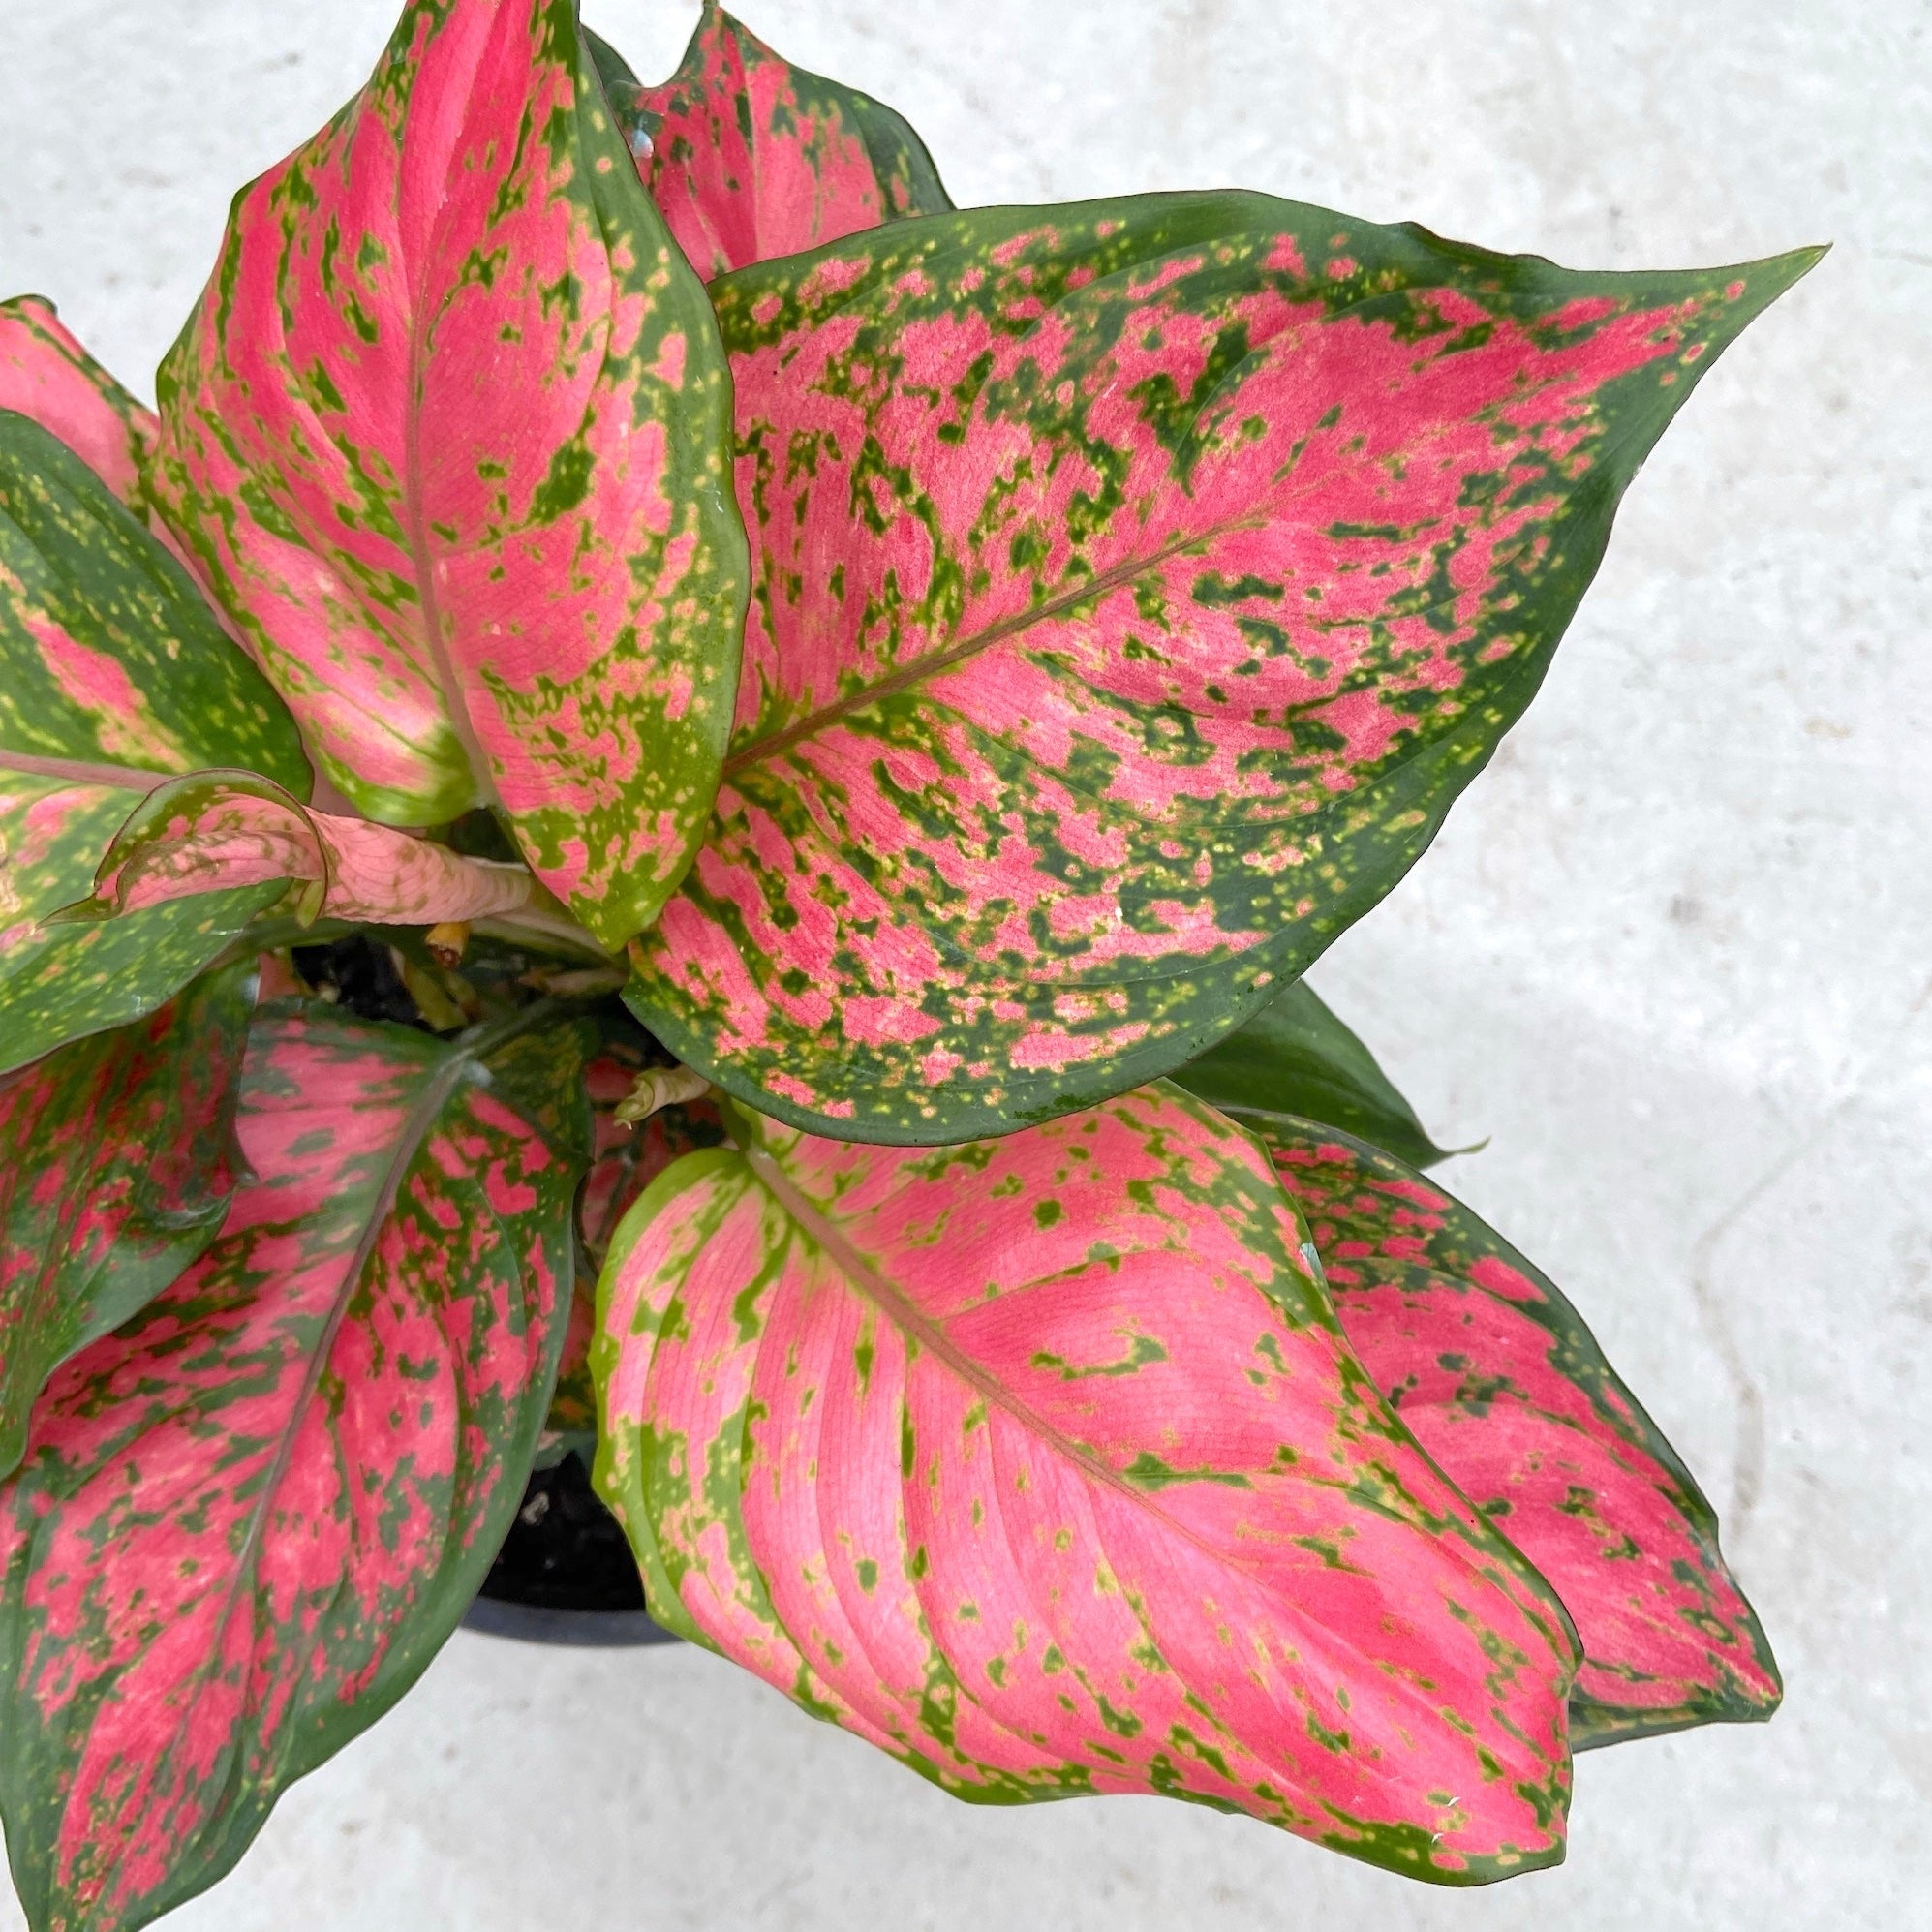 Aglaonema lady valentine pink and green leaves close up